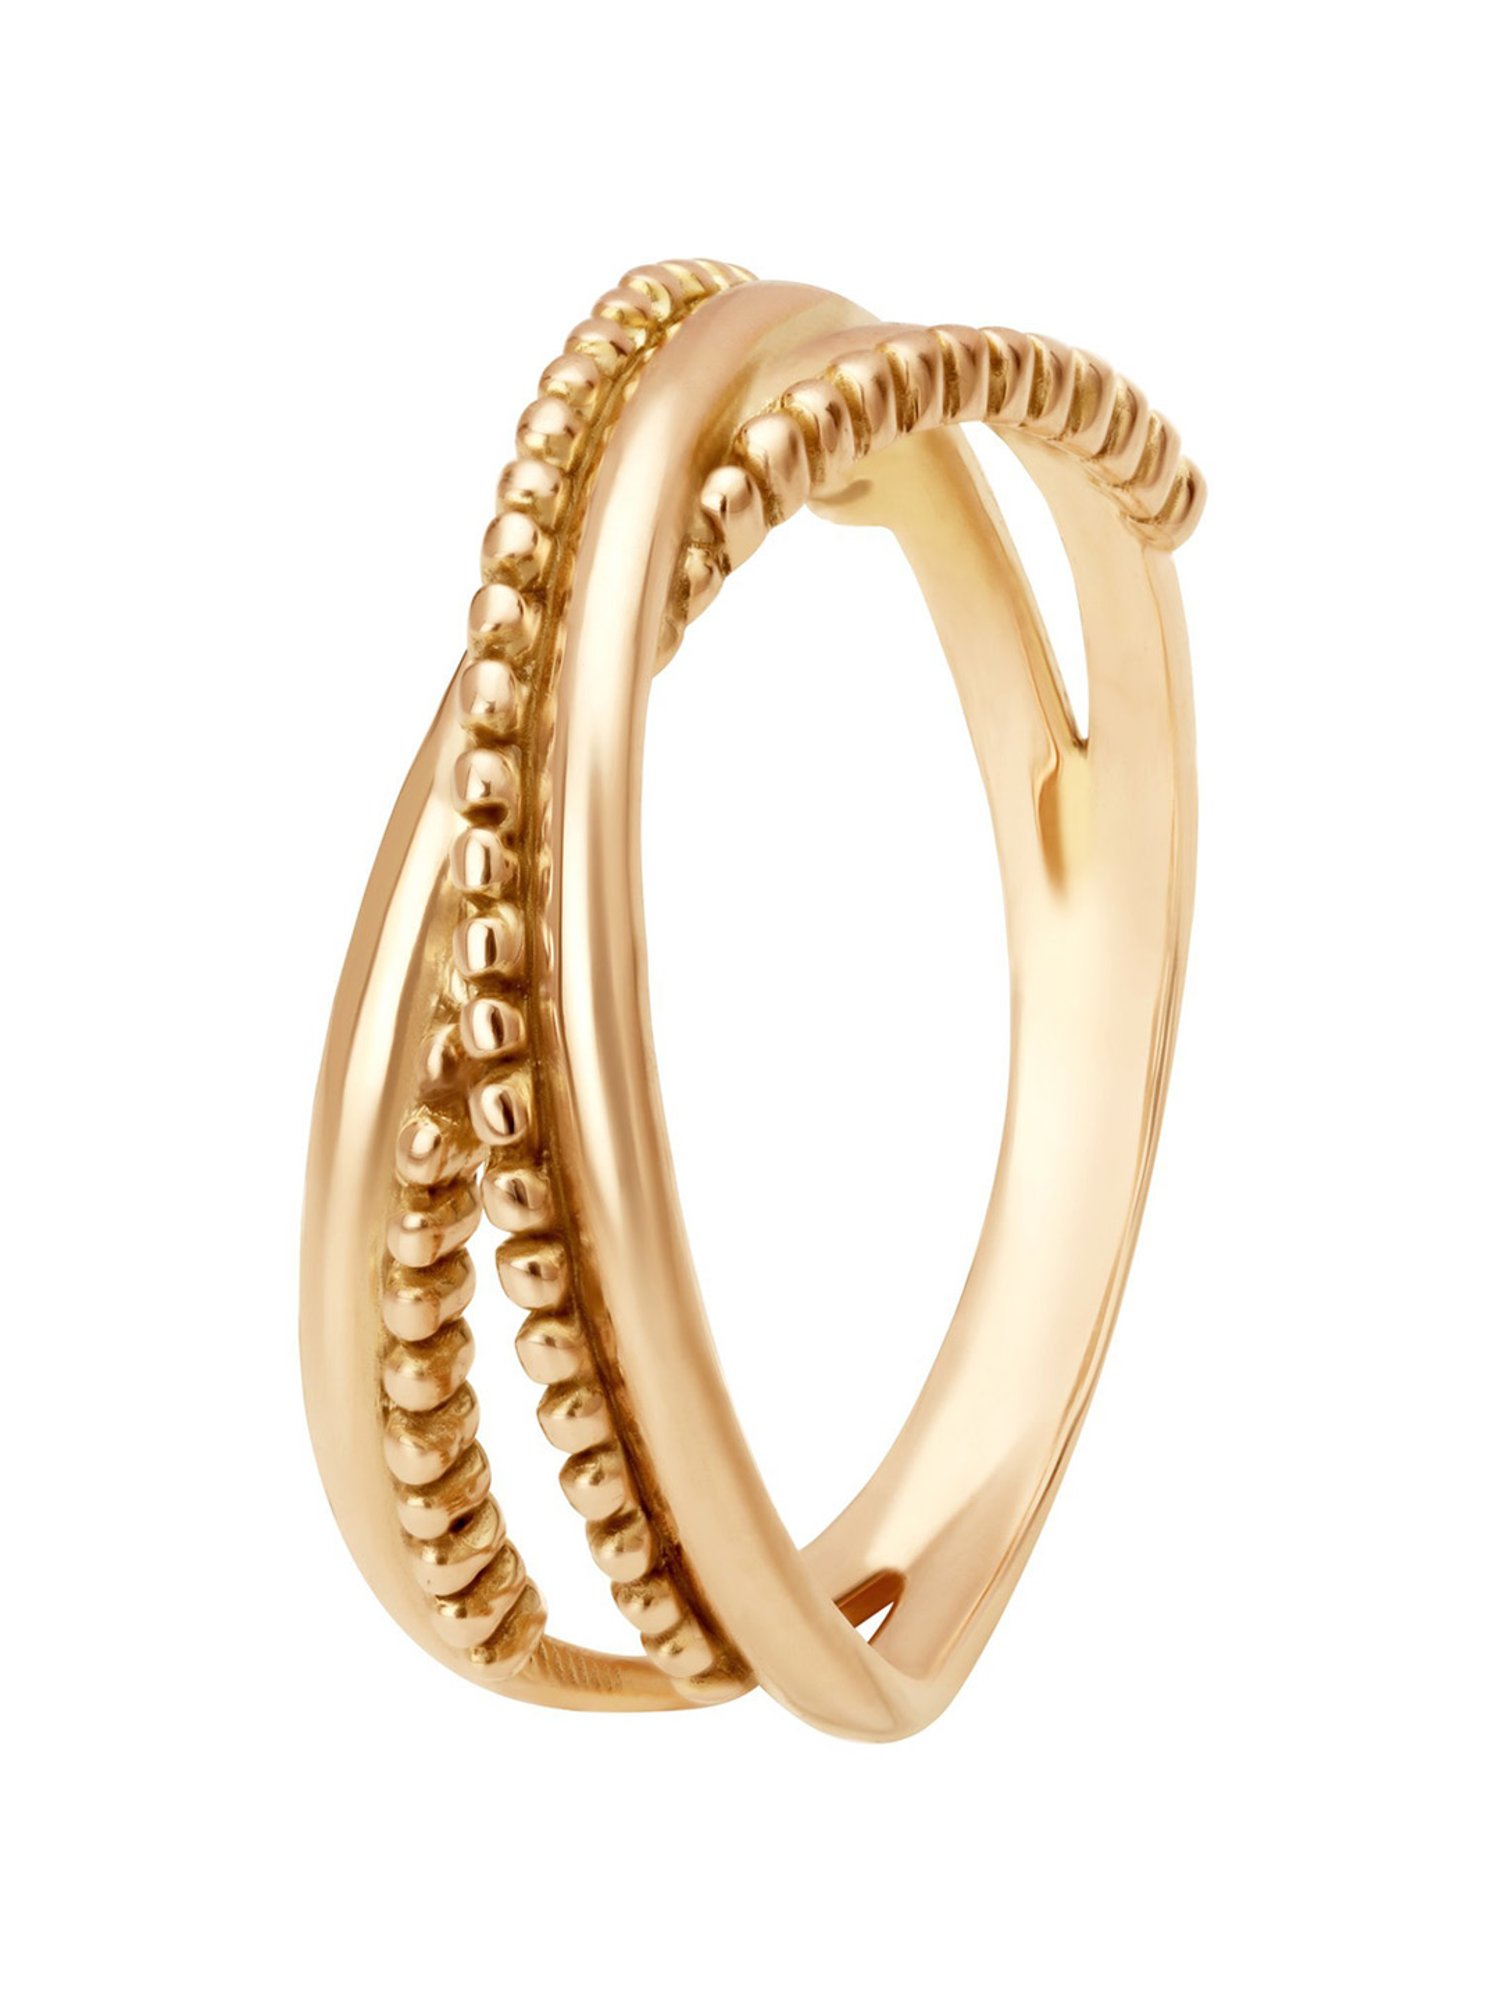 Tanishq gold ring for female with price – Tanishq diamond rings with prices  – Price List – – Clickindia – right hand ring designs with round diamond  stone